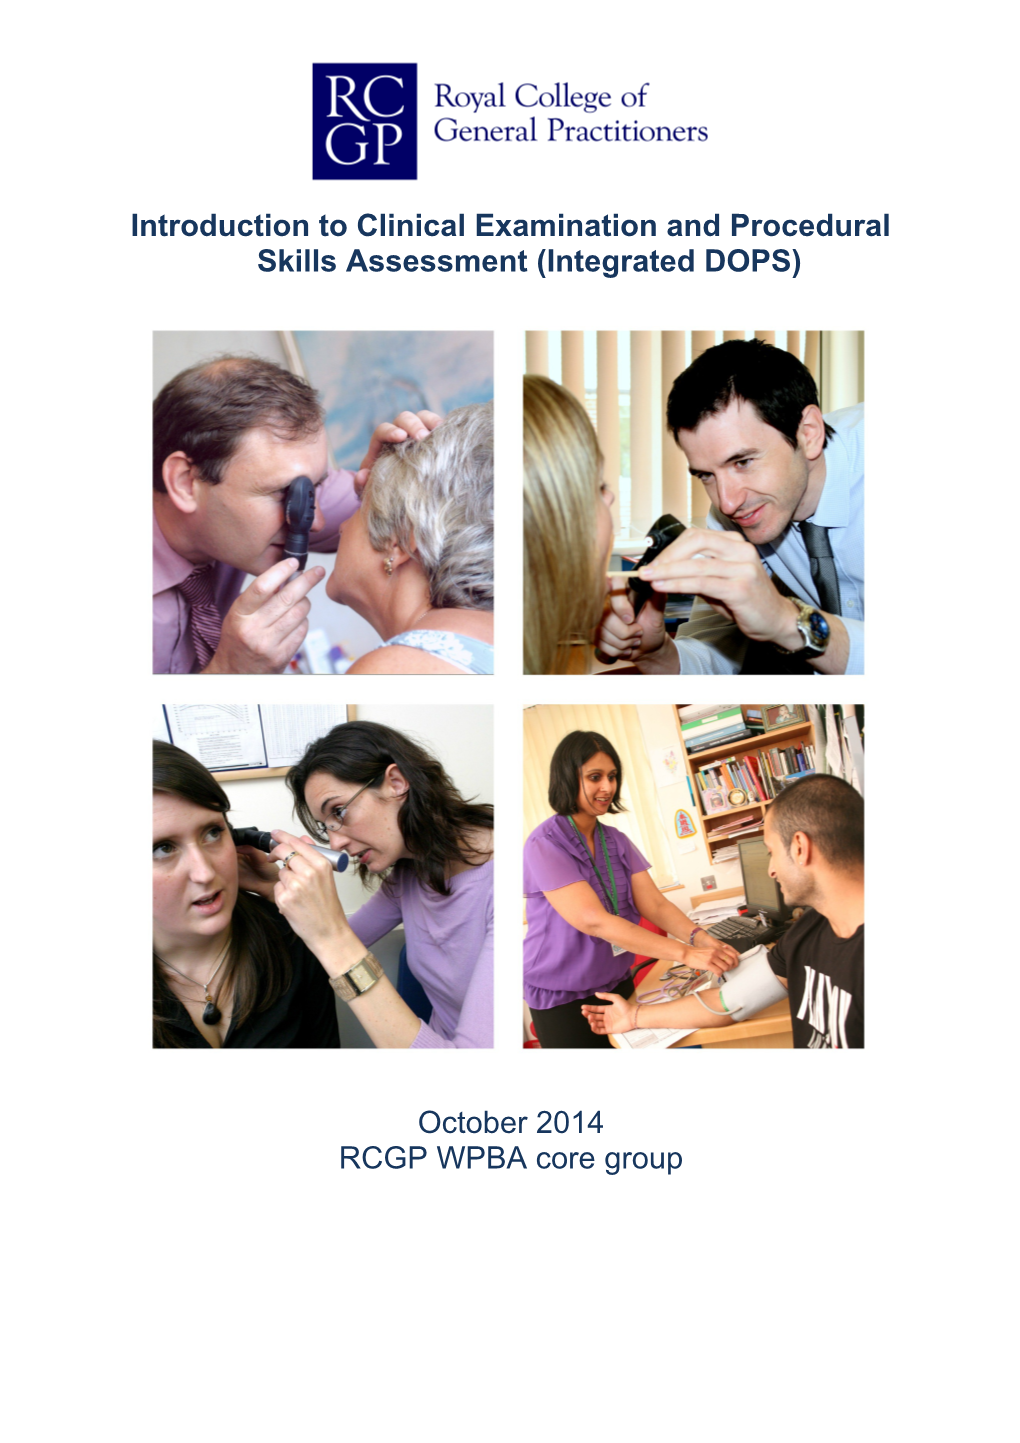 Introduction to Clinical Examination and Procedural Skills Assessment (Integrated DOPS)